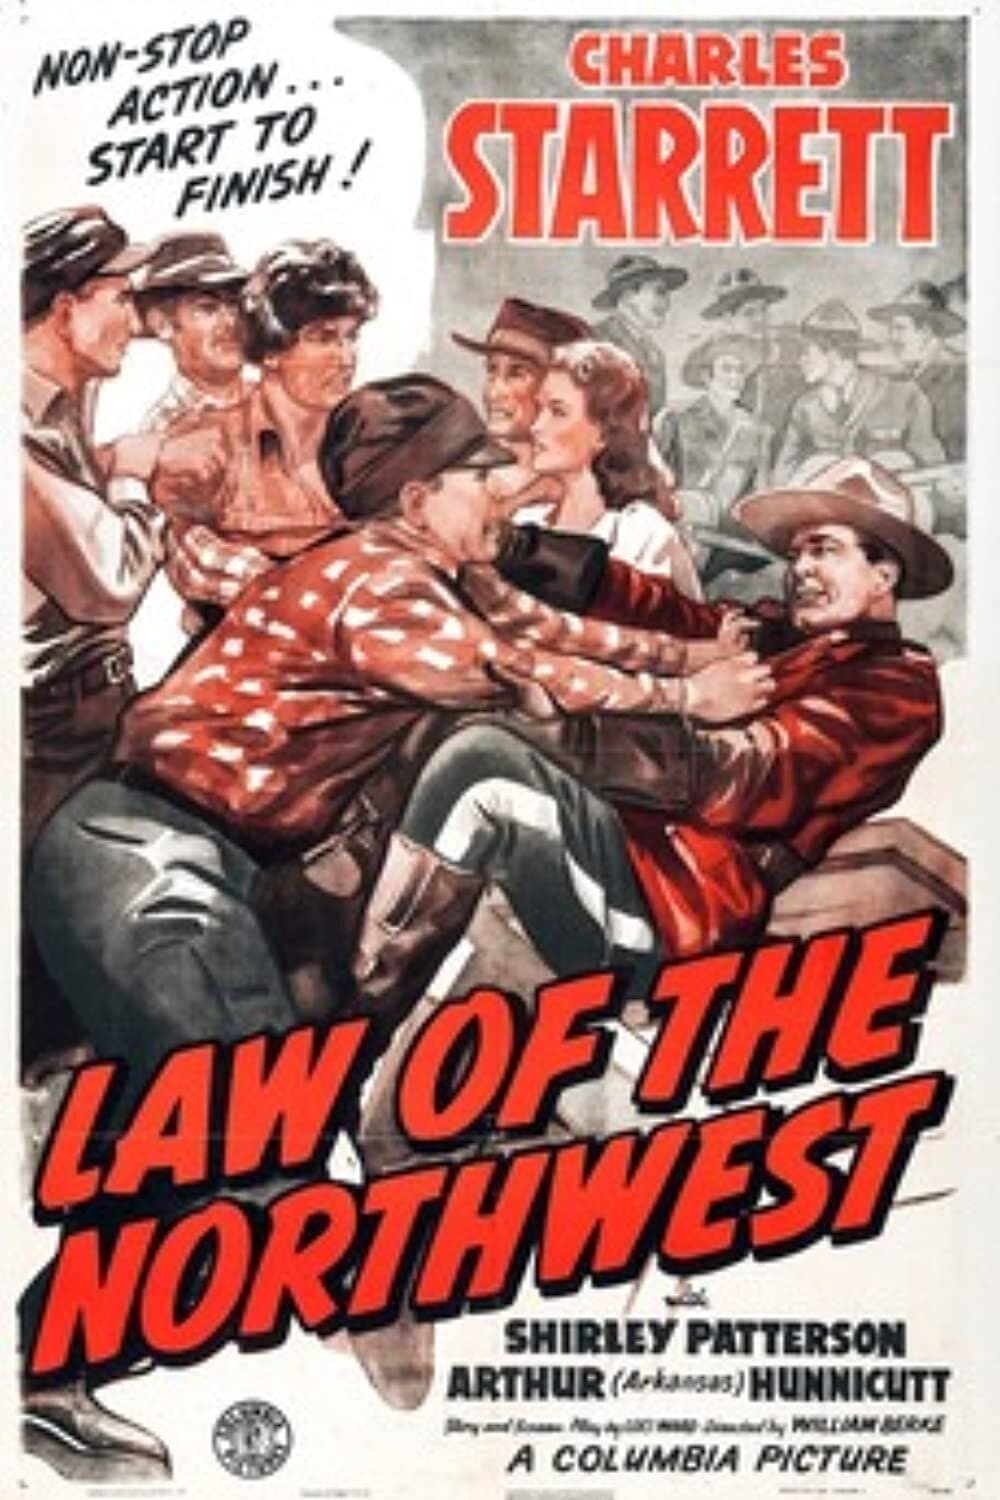 Law of the Northwest